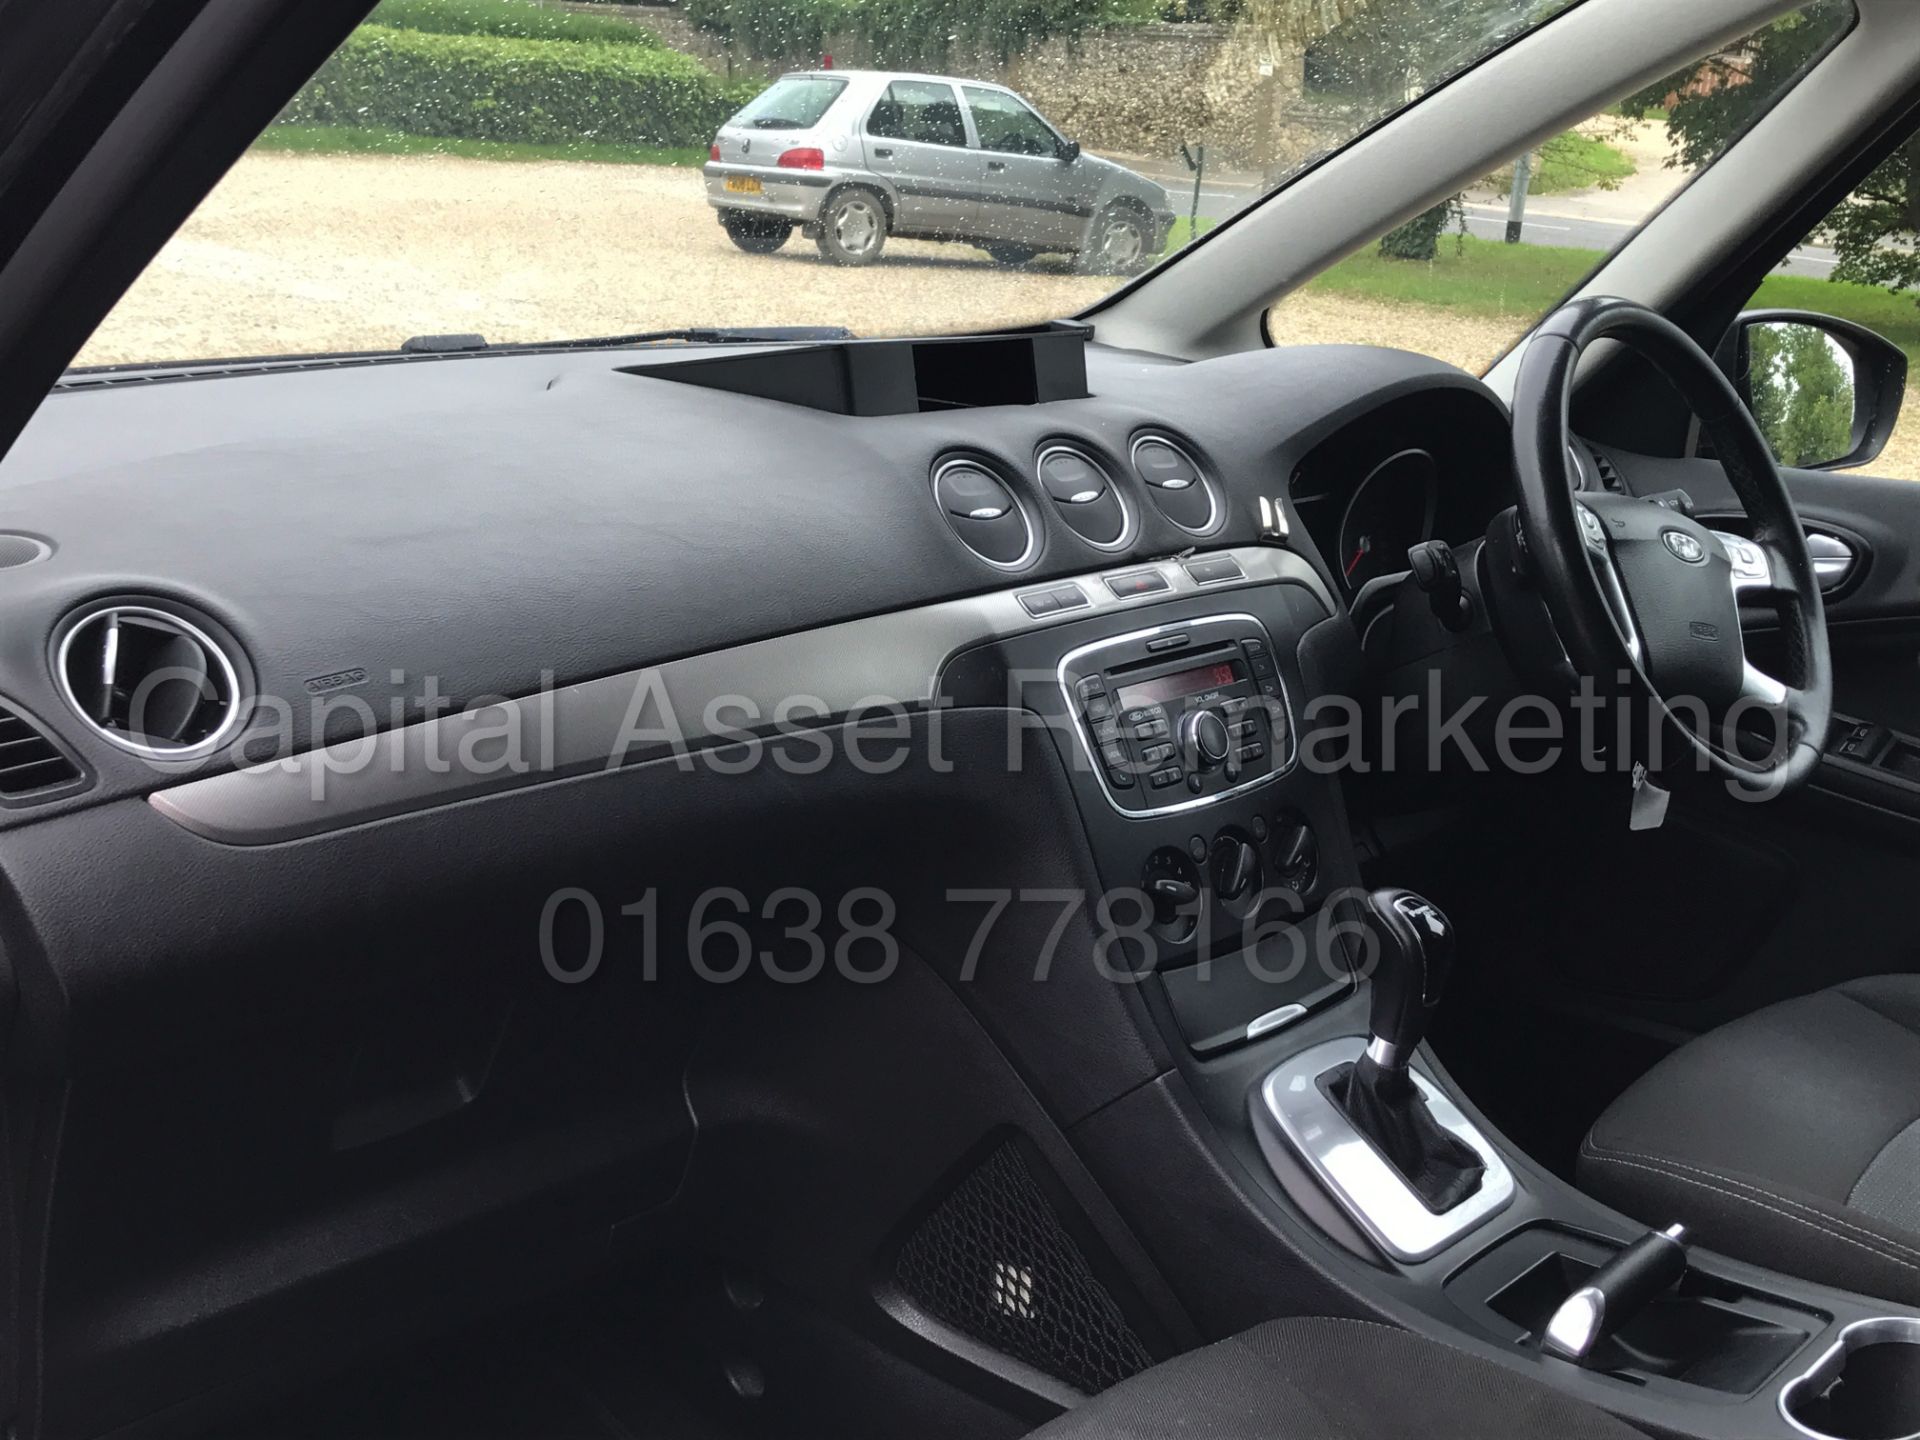 (On Sale) FORD GALAXY 'ZETEC' 7 SEATER MPV (2013 MODEL) '2.0 TDCI - 140 BHP - POWER SHIFT' - Image 12 of 27